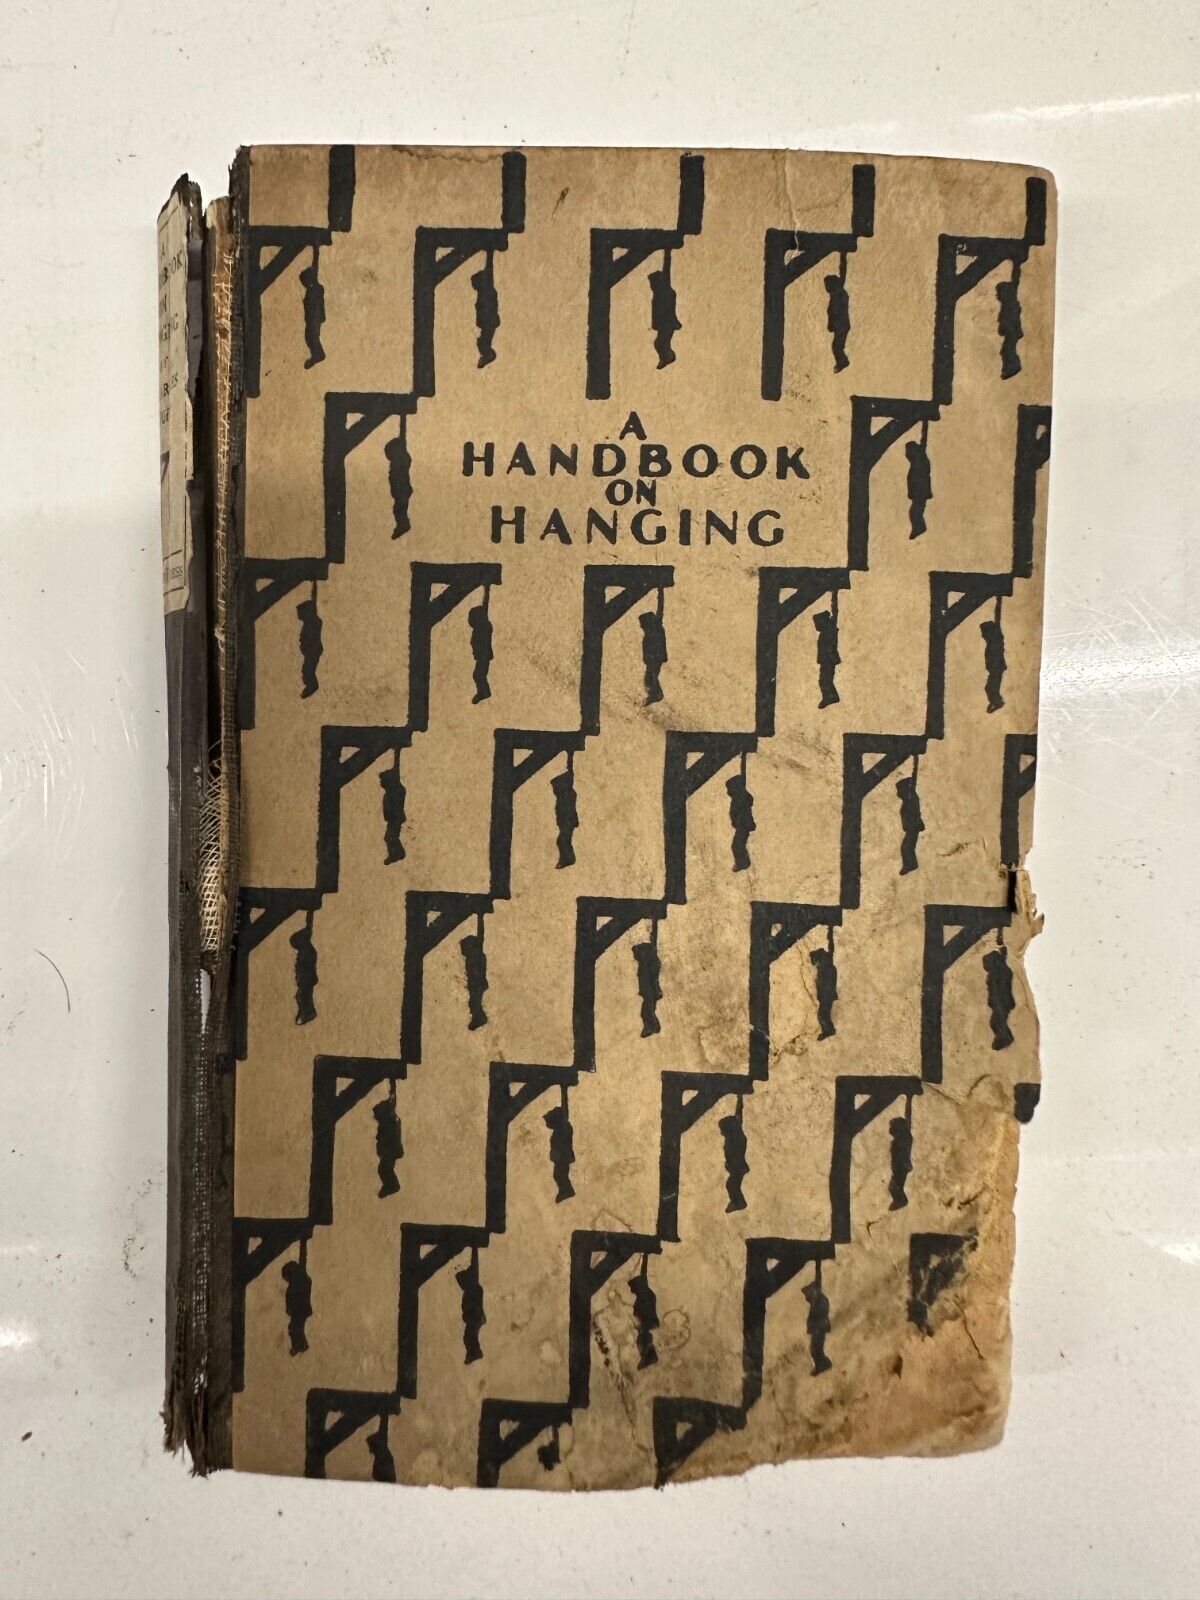 A Handbook on Hanging by Charles Duff 1928 PLEASE SEE VIDEO